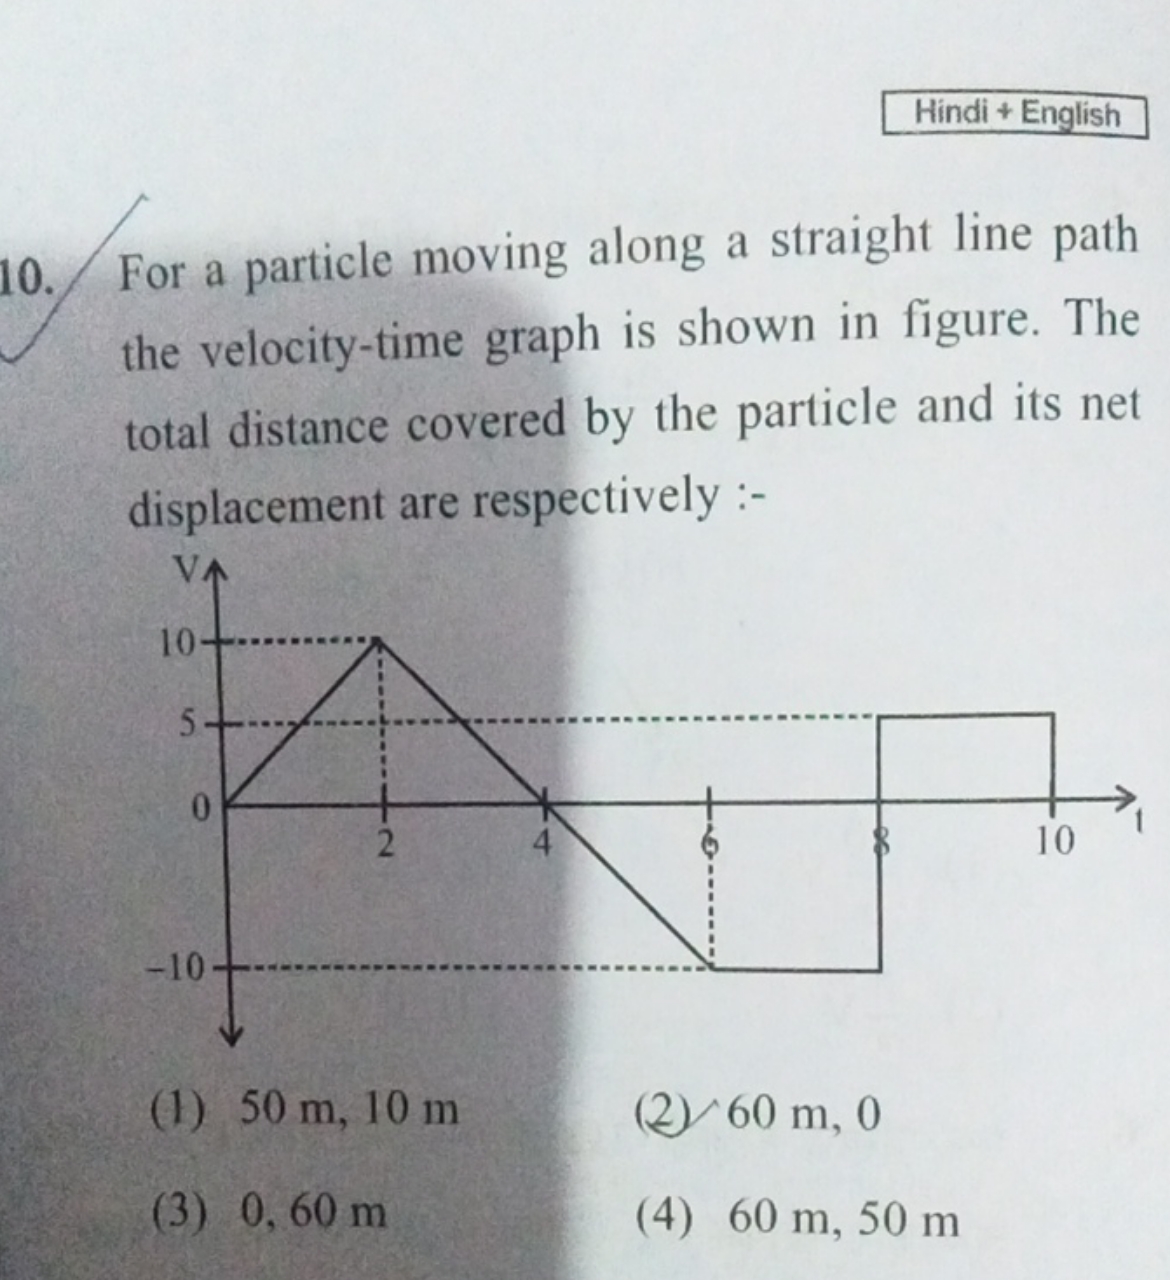 Hindi + English 10. For a particle moving along a straight line path t